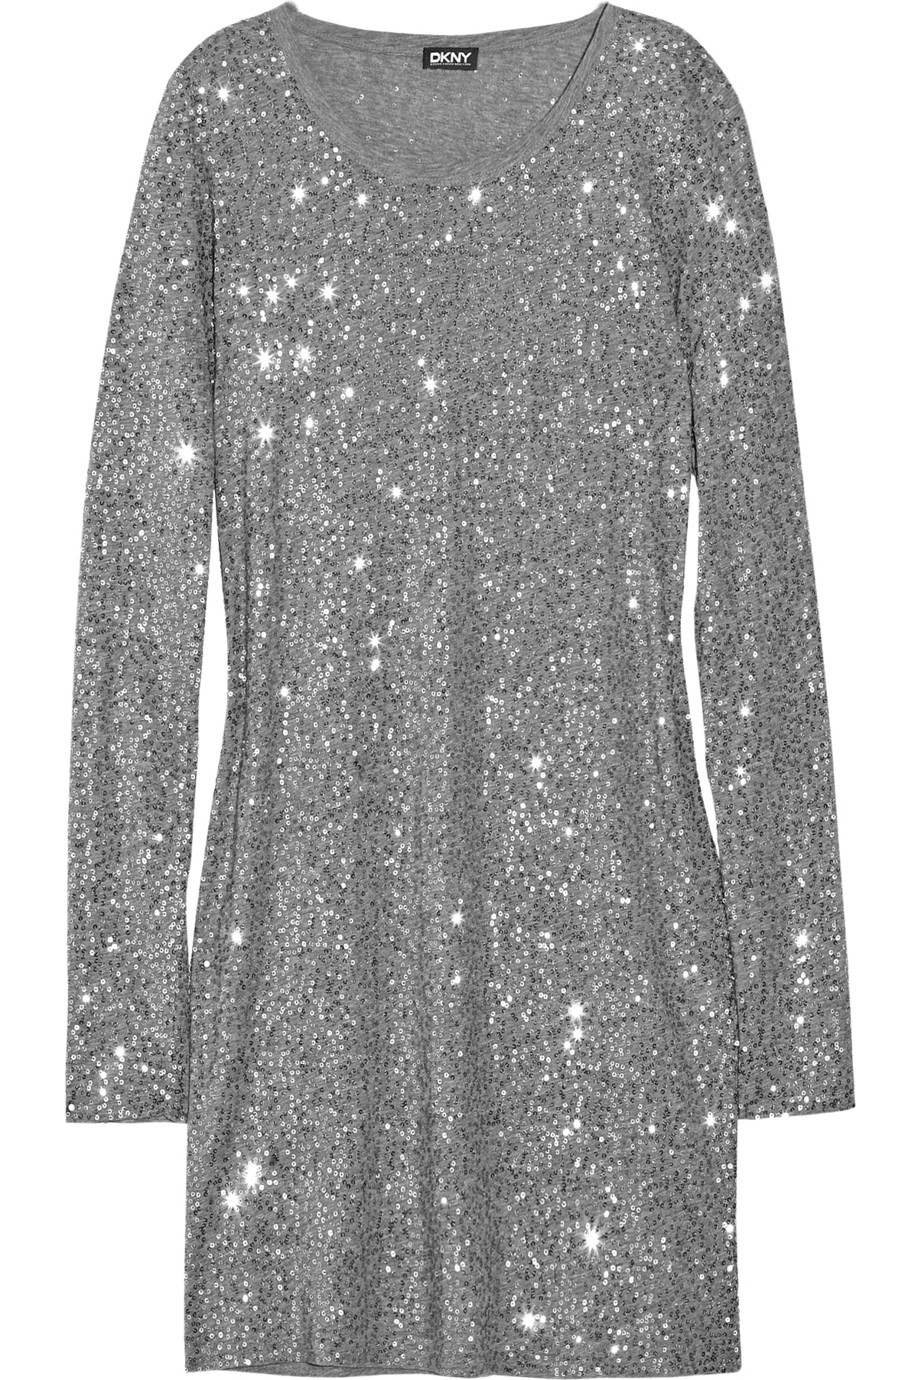 DKNY Cotton Sequin-embellished T-shirt Dress in Silver (Metallic) - Lyst